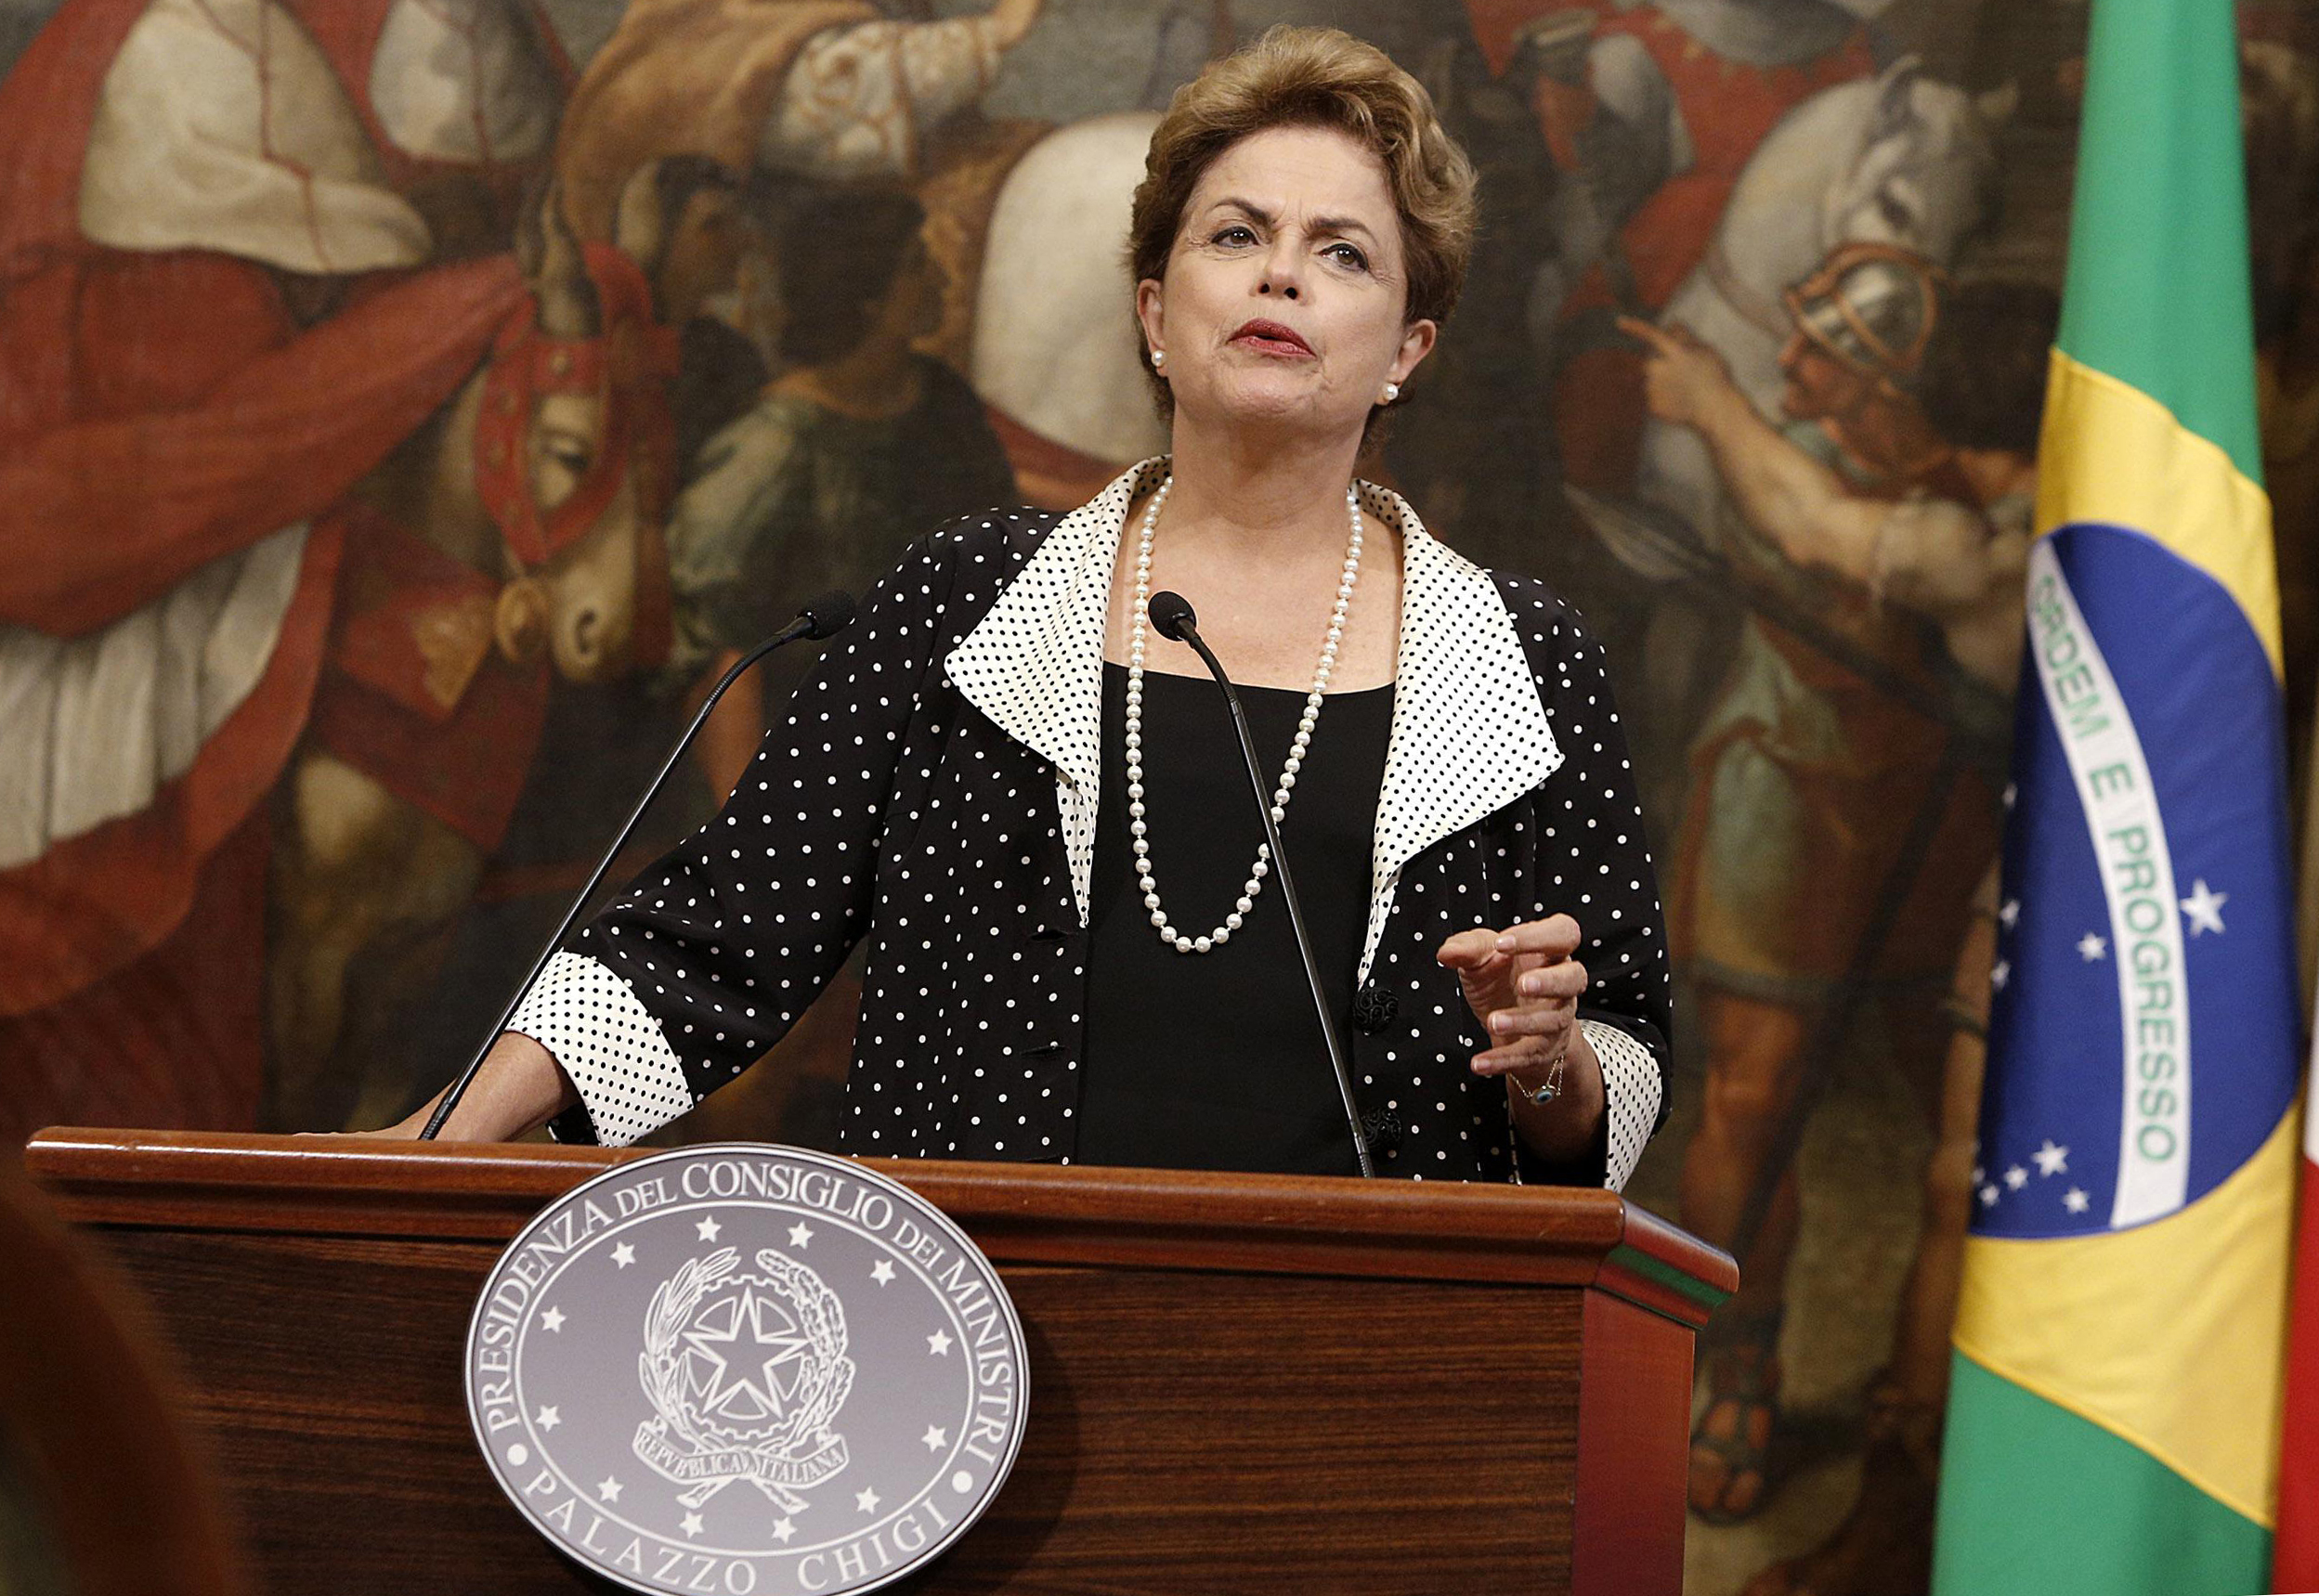 Brazilian President Dilma Rousseff speaks during a joint press conference with Italian Premier Matteo Renzi, at Chigi's Premier Palace in Rome on July 10, 2015. (Giuseppe Lami—AP)